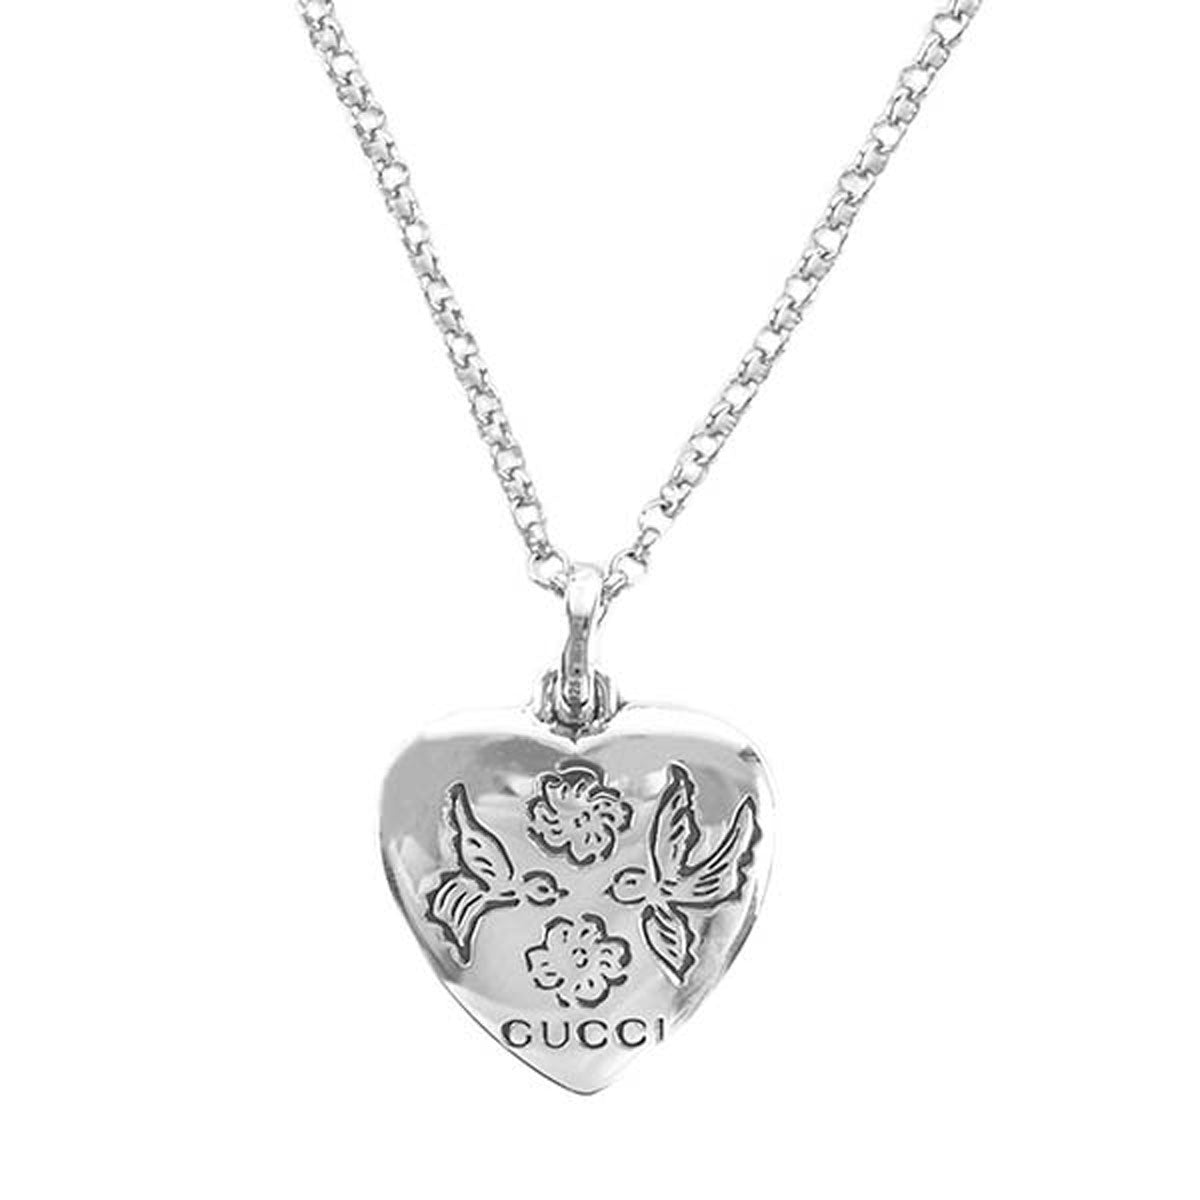 Gucci Blind for Love Necklace in Sterling Silver with Blue Z | La Mine d'Or  | Moncton, NB